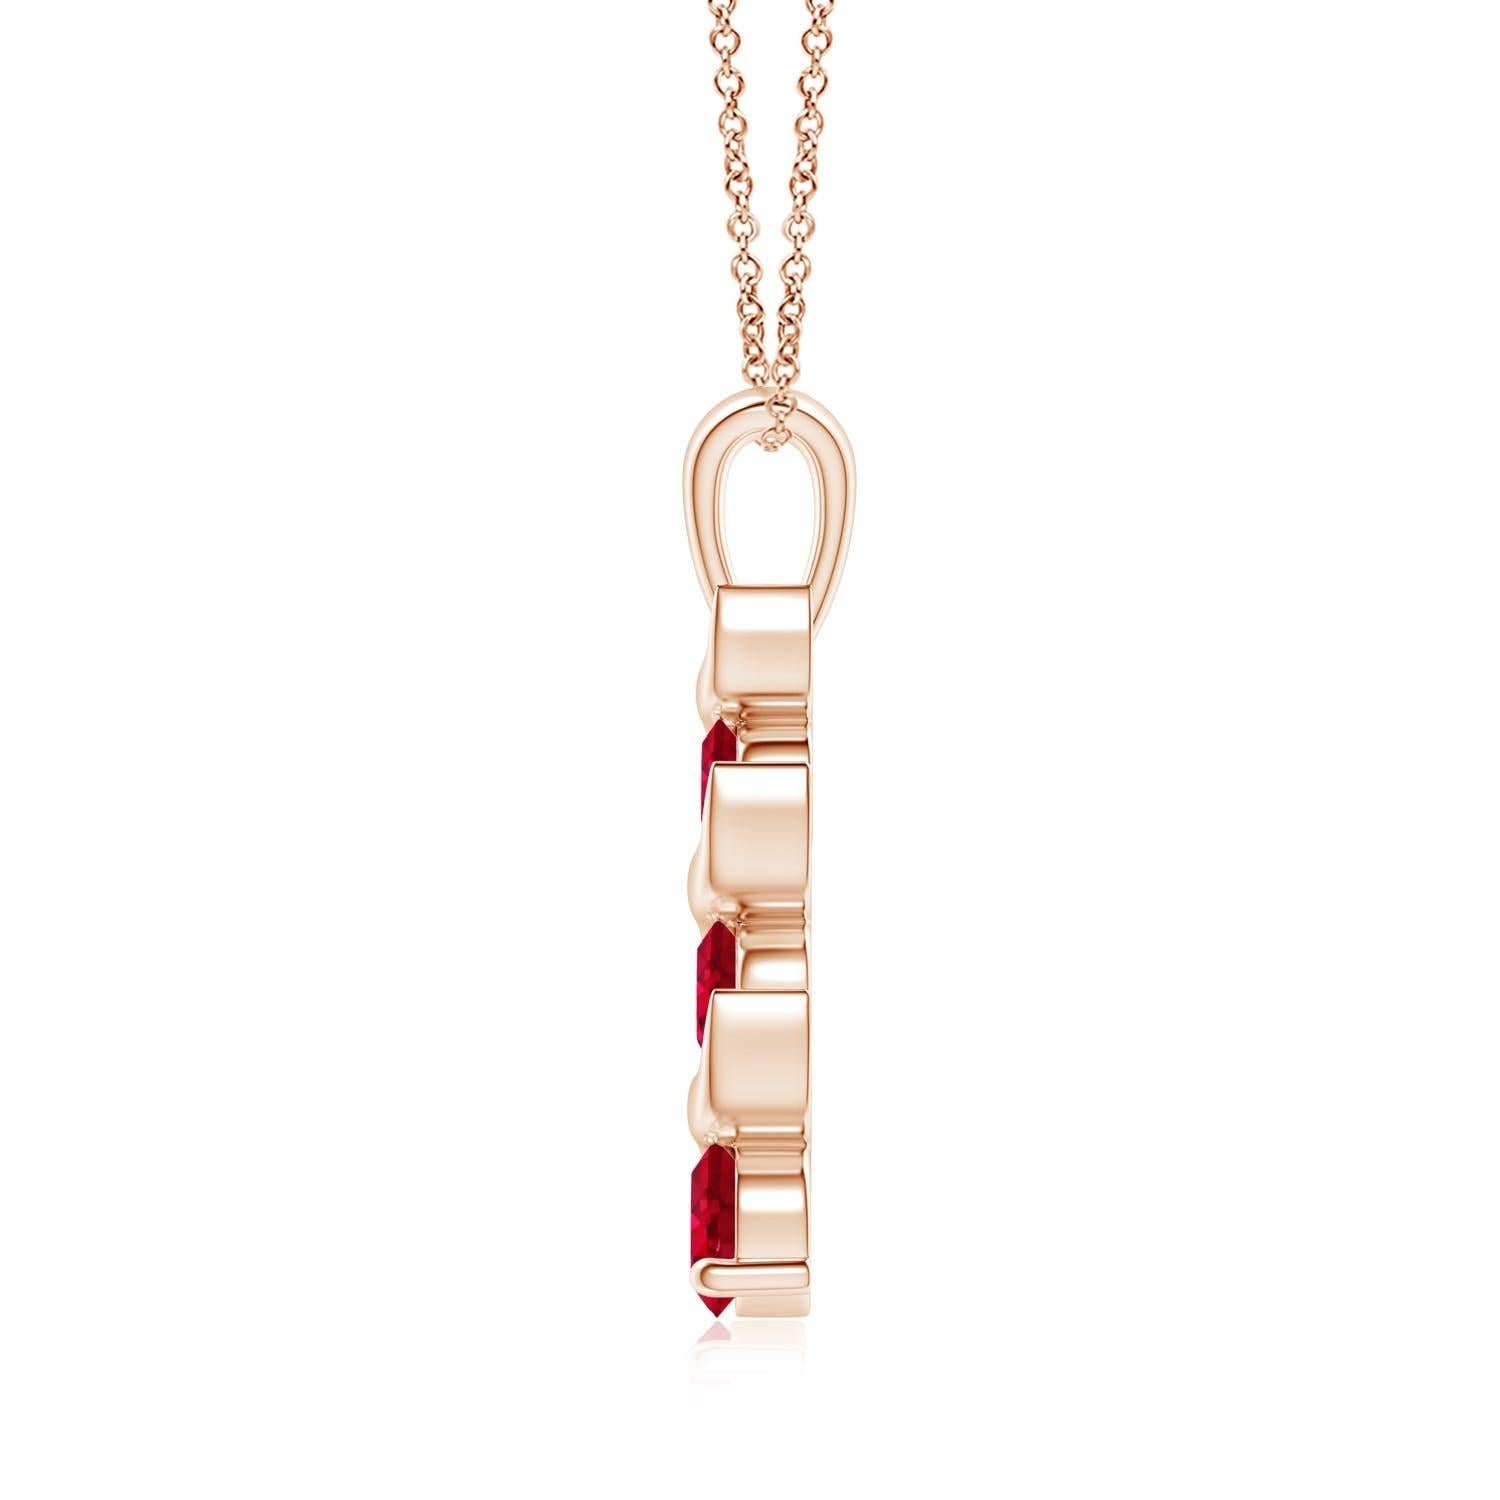 Channel set in an exquisite journey trail, the three graduating round rubies exude their bold and striking red hue. This gorgeous three stone ruby pendant is designed in 14K rose gold and connects to a lustrous metal bale.
Ruby is the birthstone for